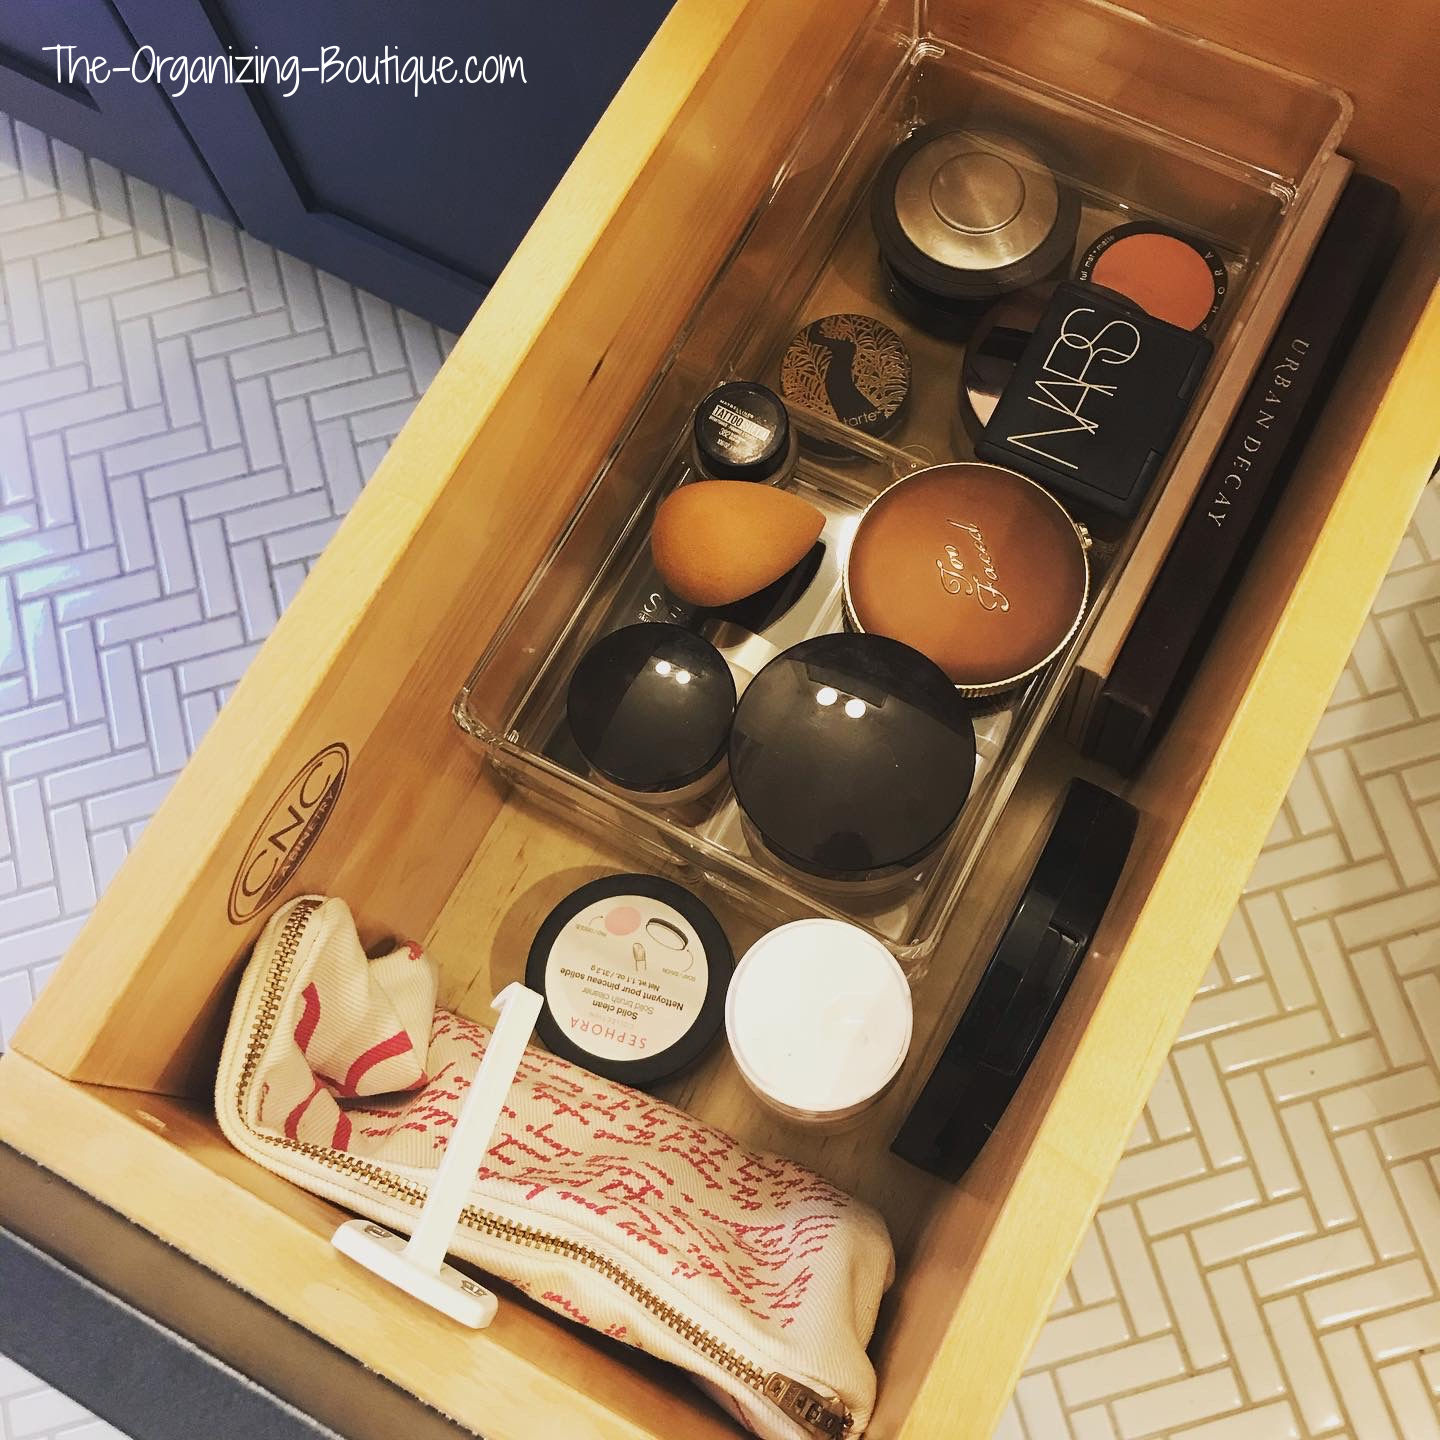 https://www.the-organizing-boutique.com/images/Bathroom-Makeup-Drawer-Tray-2.jpg